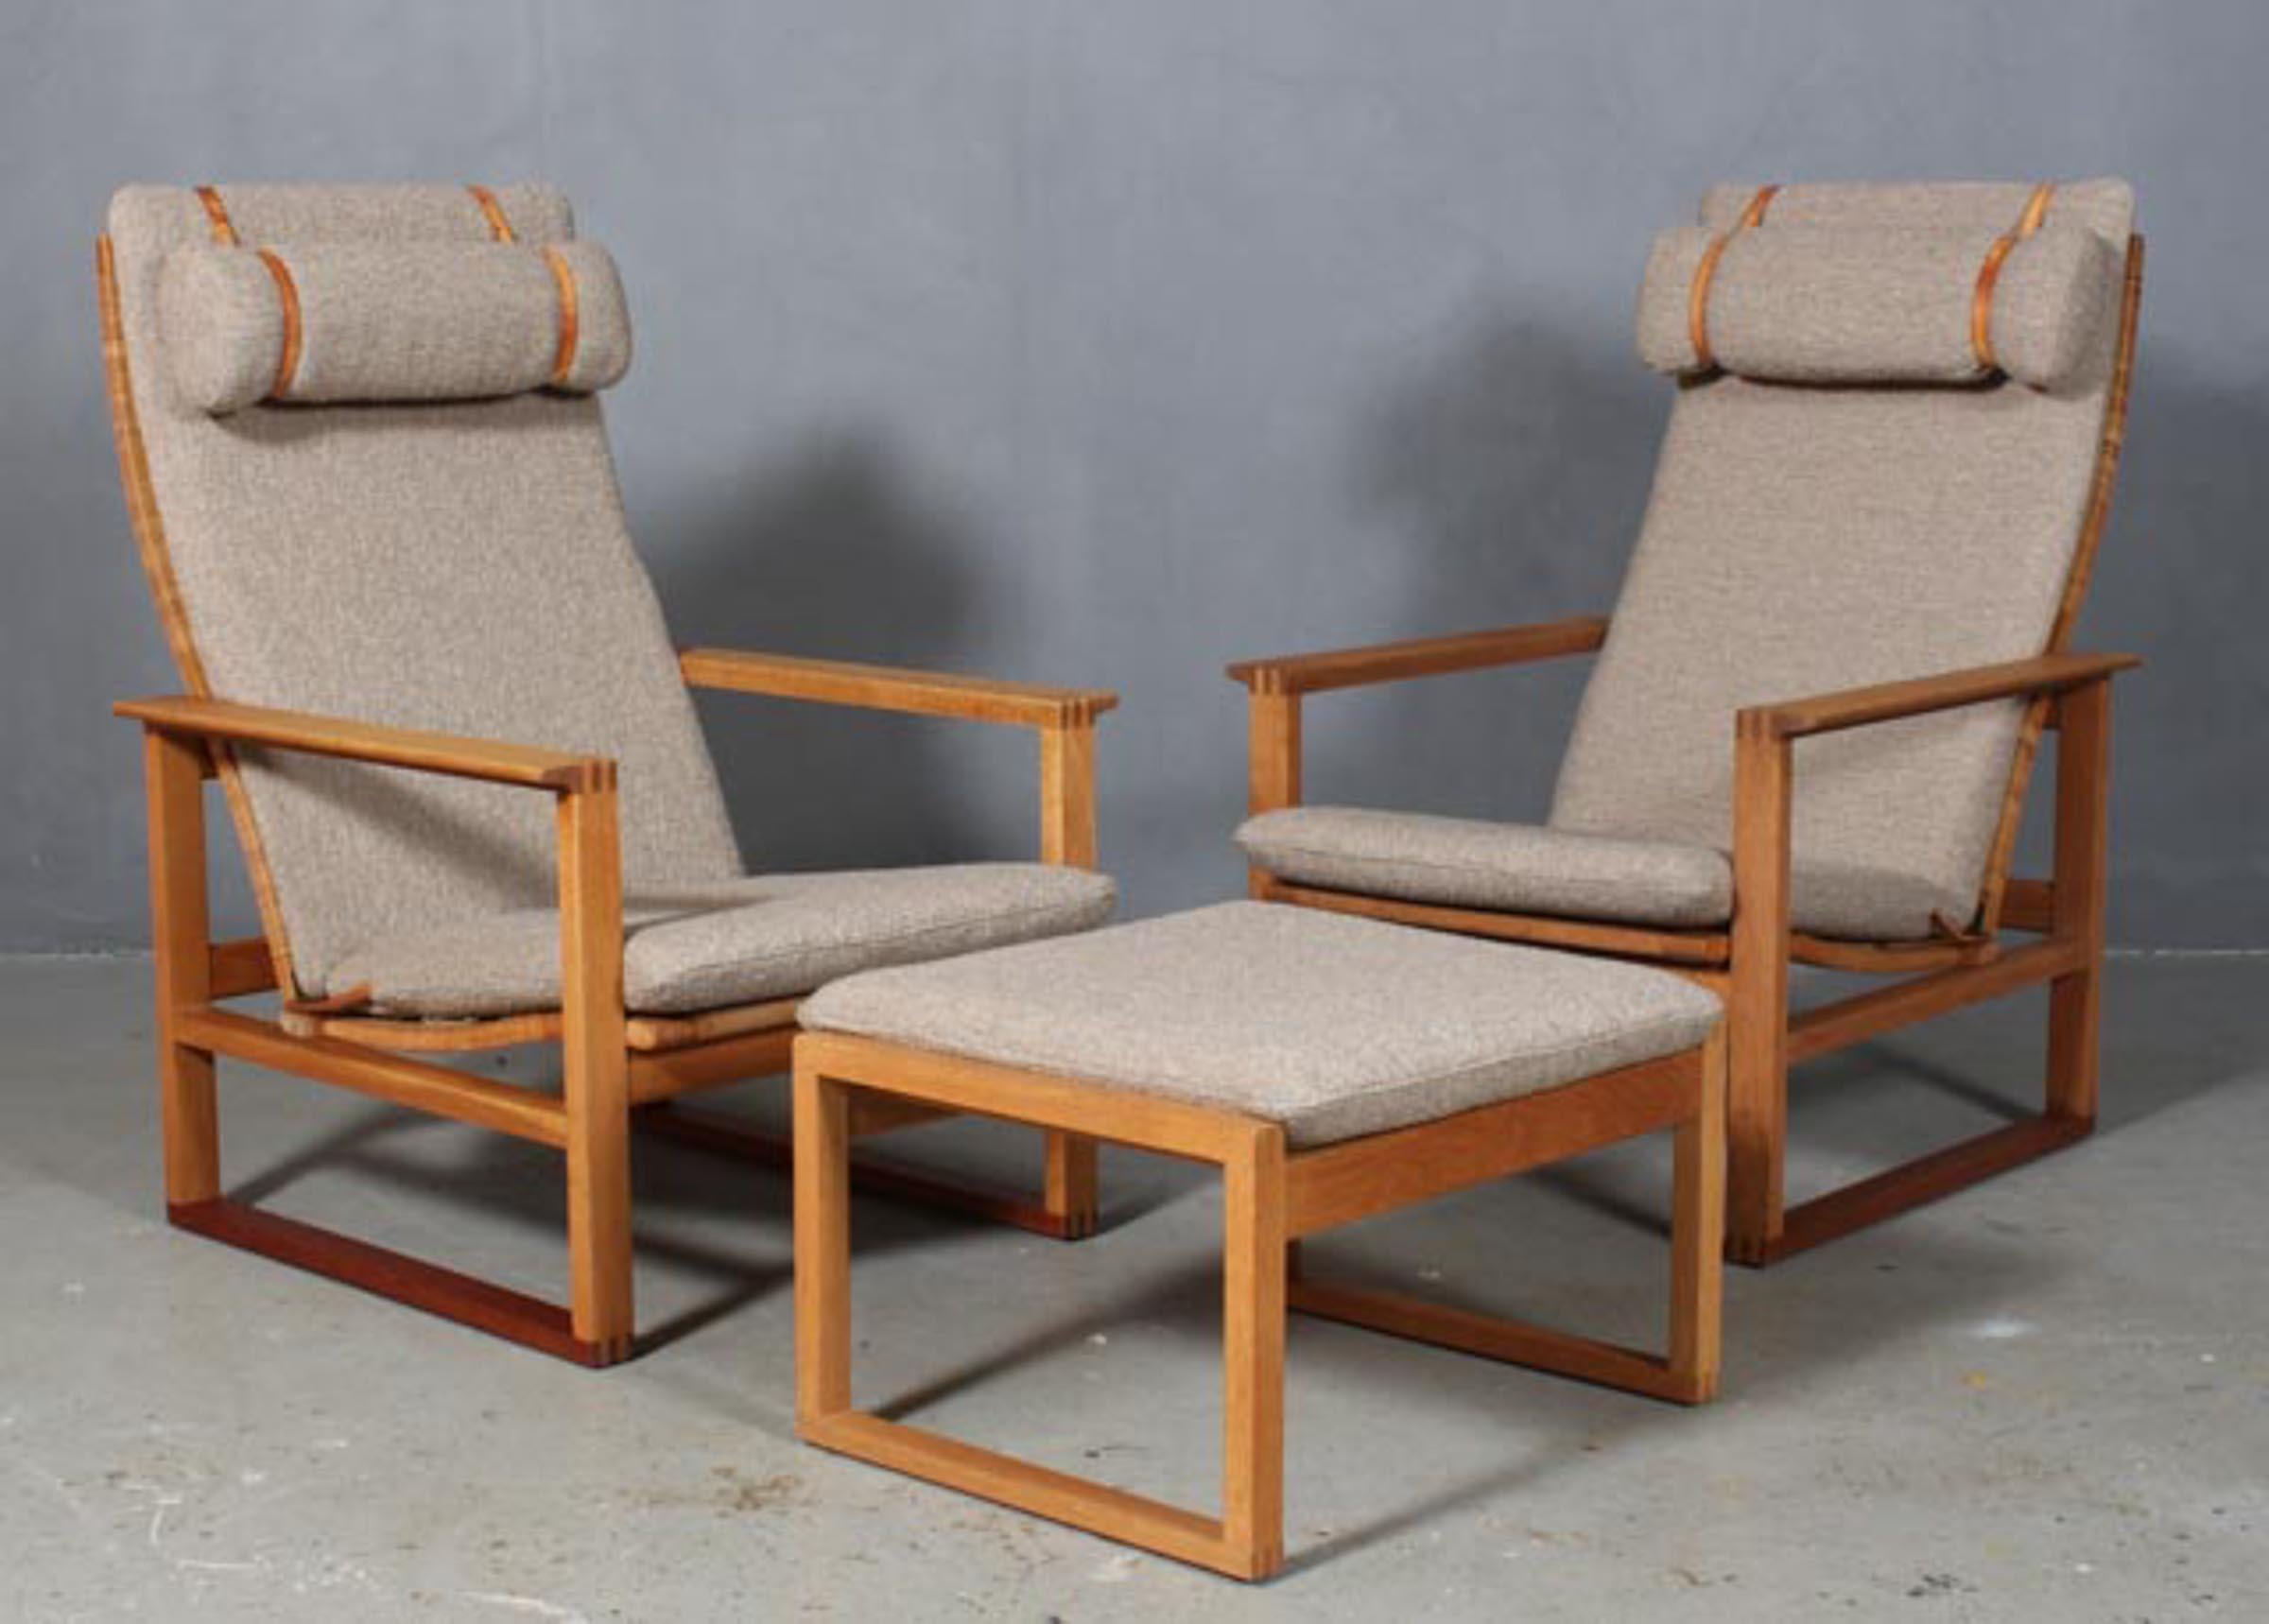 A set of Børge Mogensen lounge chairs designed in 1956 model number 2254 for Fredericia Stolefabrik. Cubical frames made of solid oak with finger joints and cane. This high back model 2254 also reclines.

Comes with an ottoman,

Reupholstered in